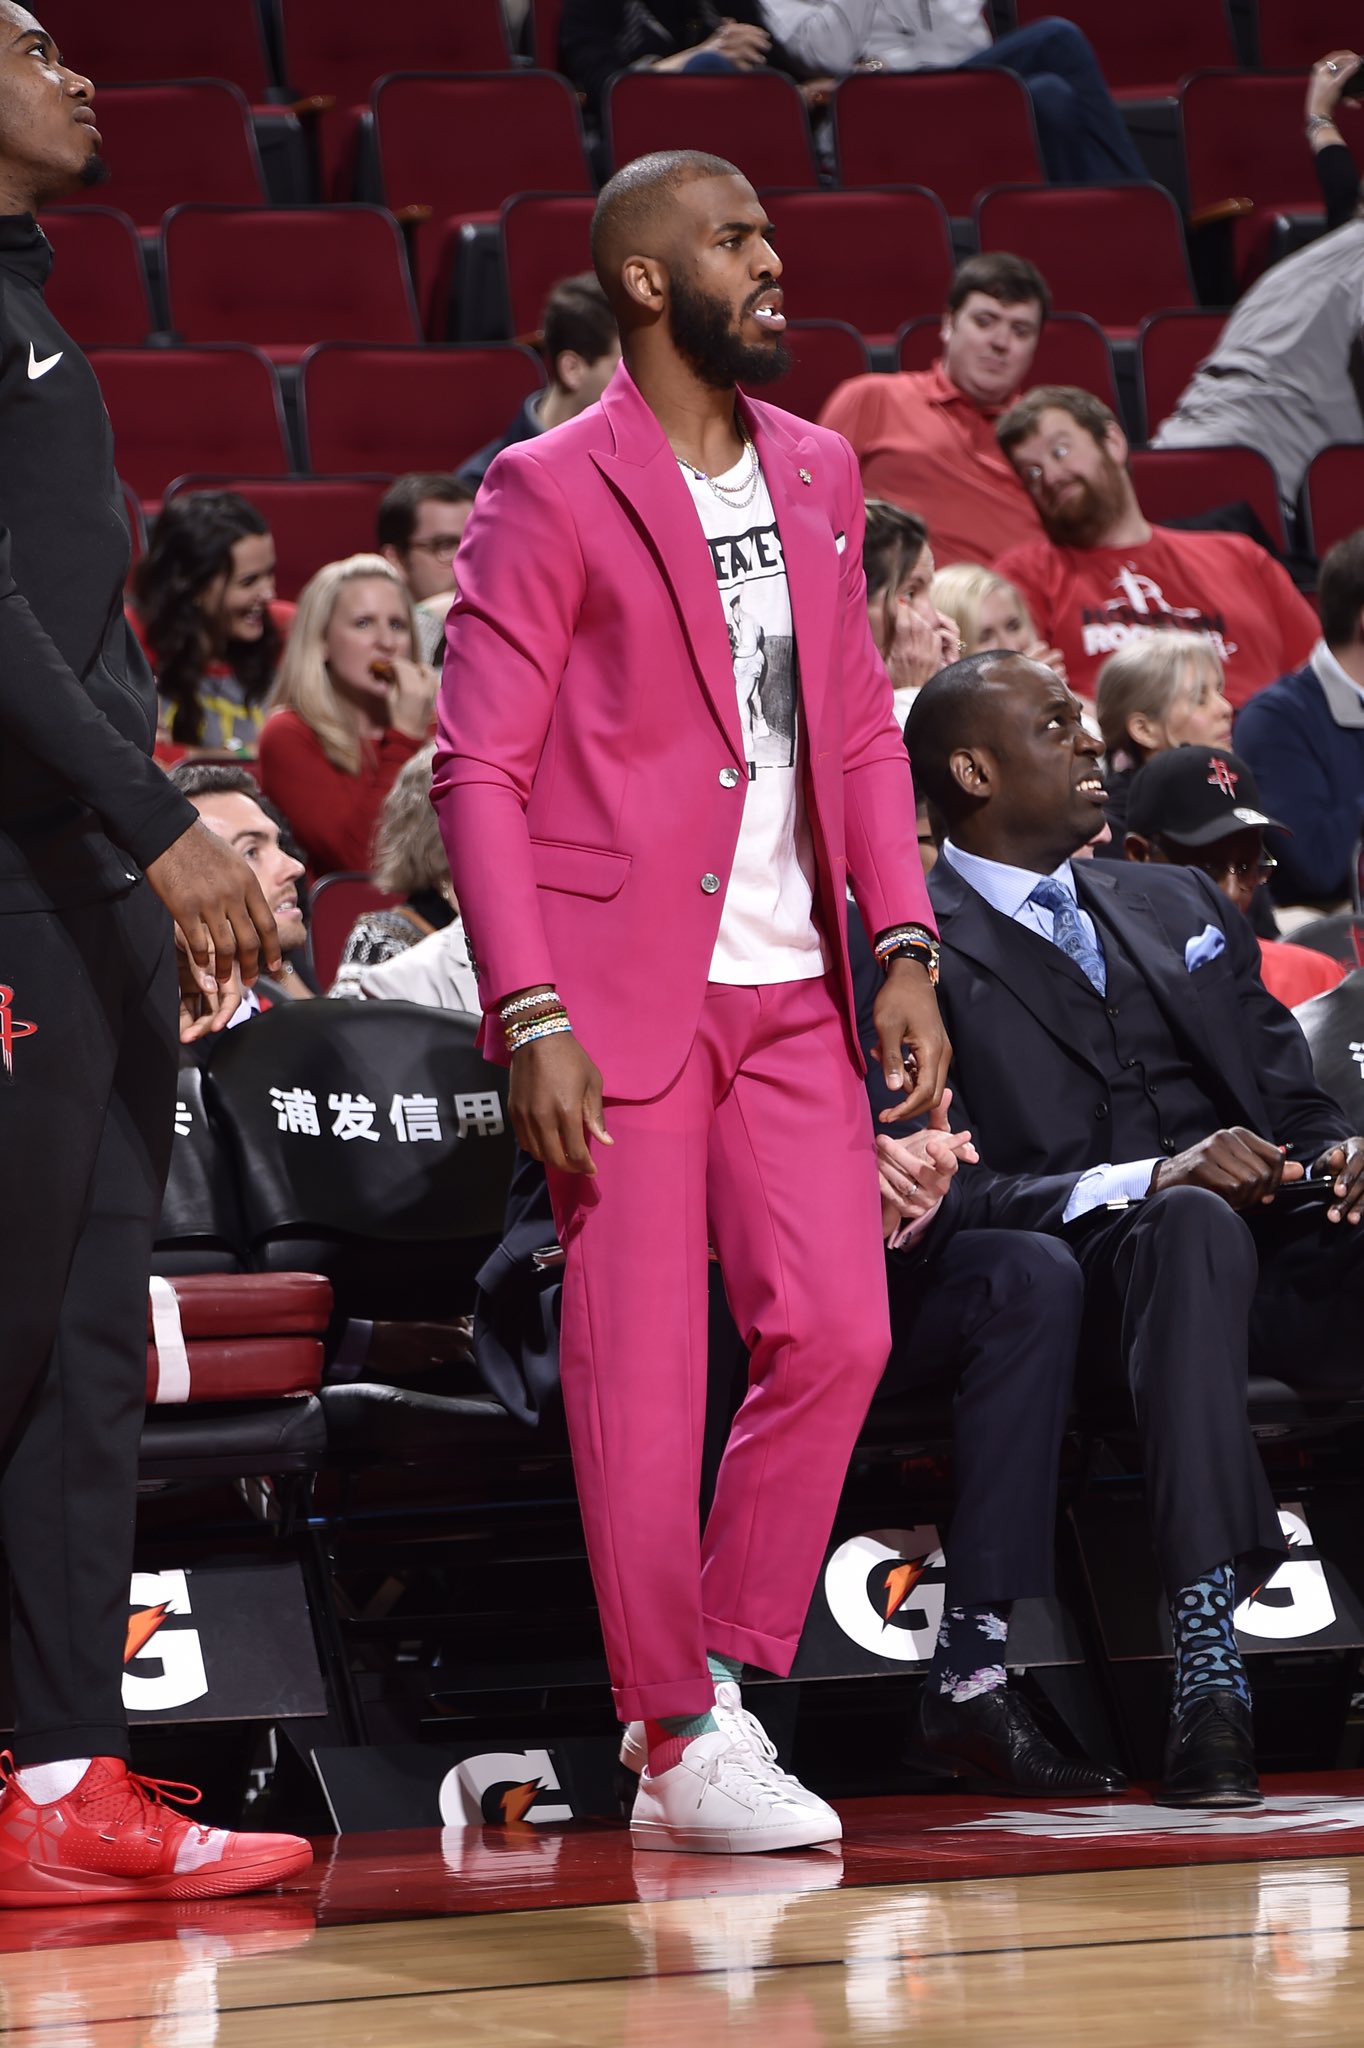 LEAGUE FITS on Instagram: “Point Gawd in Pink.”